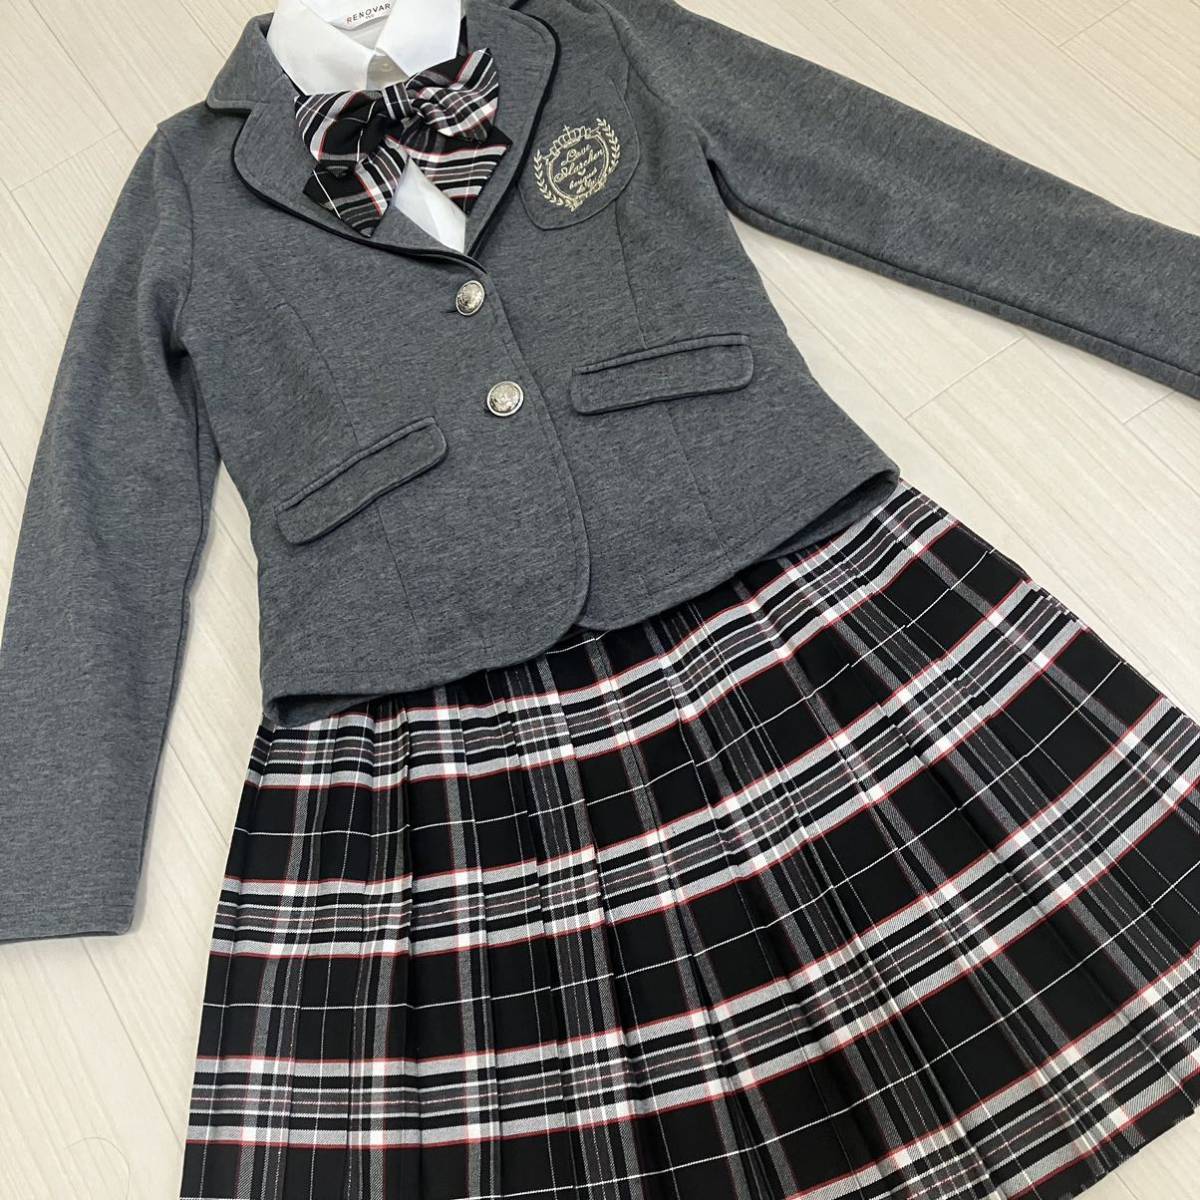 LoveMarchan Kids formal suit girl suit go in . type graduation ceremony size 150 4 point set silver button 